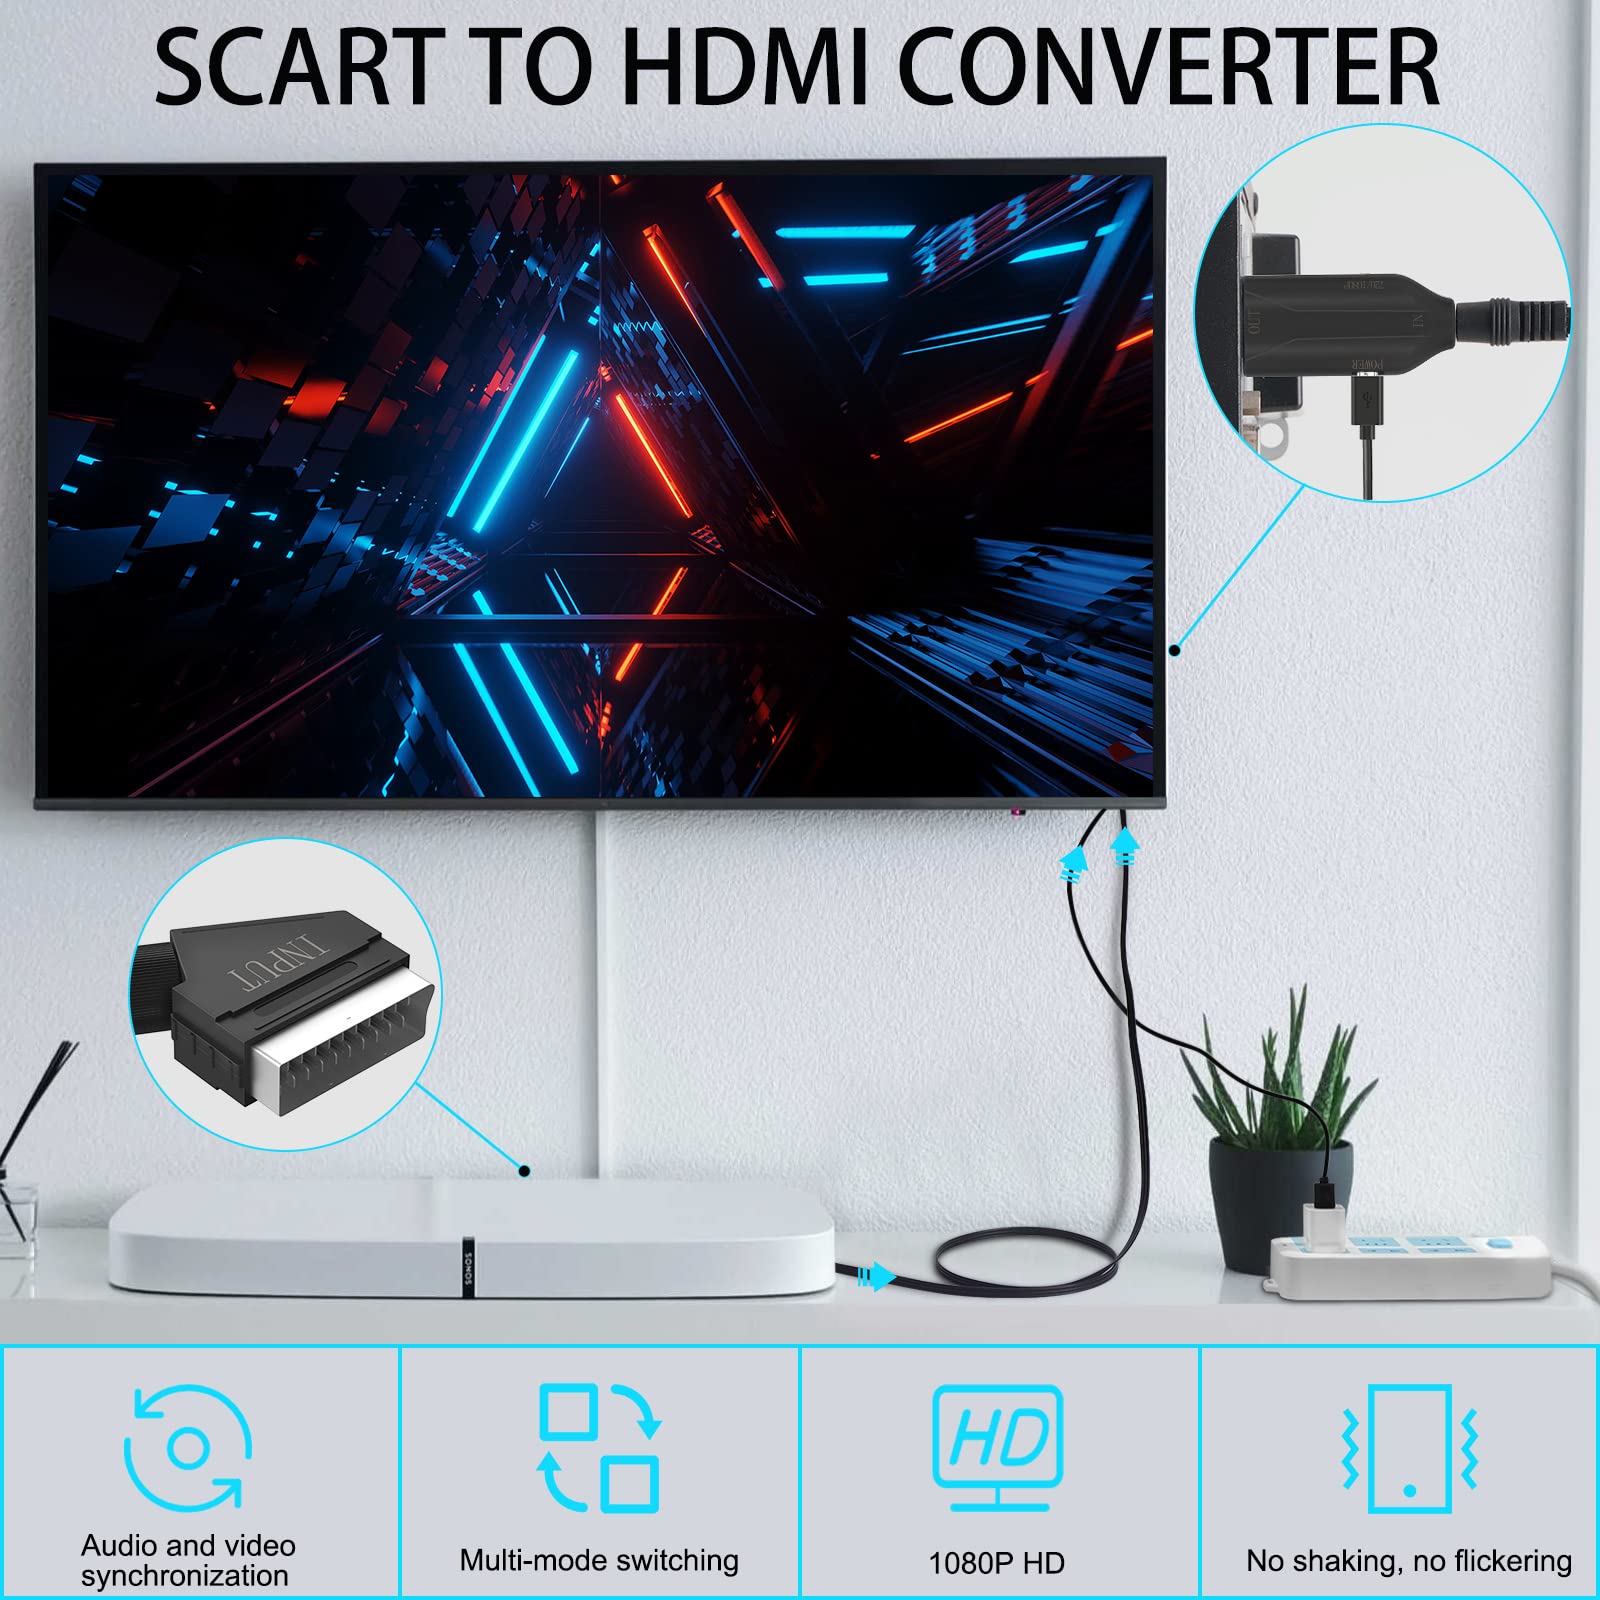 CAVN Scart to HDMI Converter, Support HDMI 720/1080P Switch Video Audio Converter for HD TV Monitor Projector STB VHS Xbox PS3 Sky Blu-ray DVD Player, Upgraded Scart to HDMI Converter with USB Cable